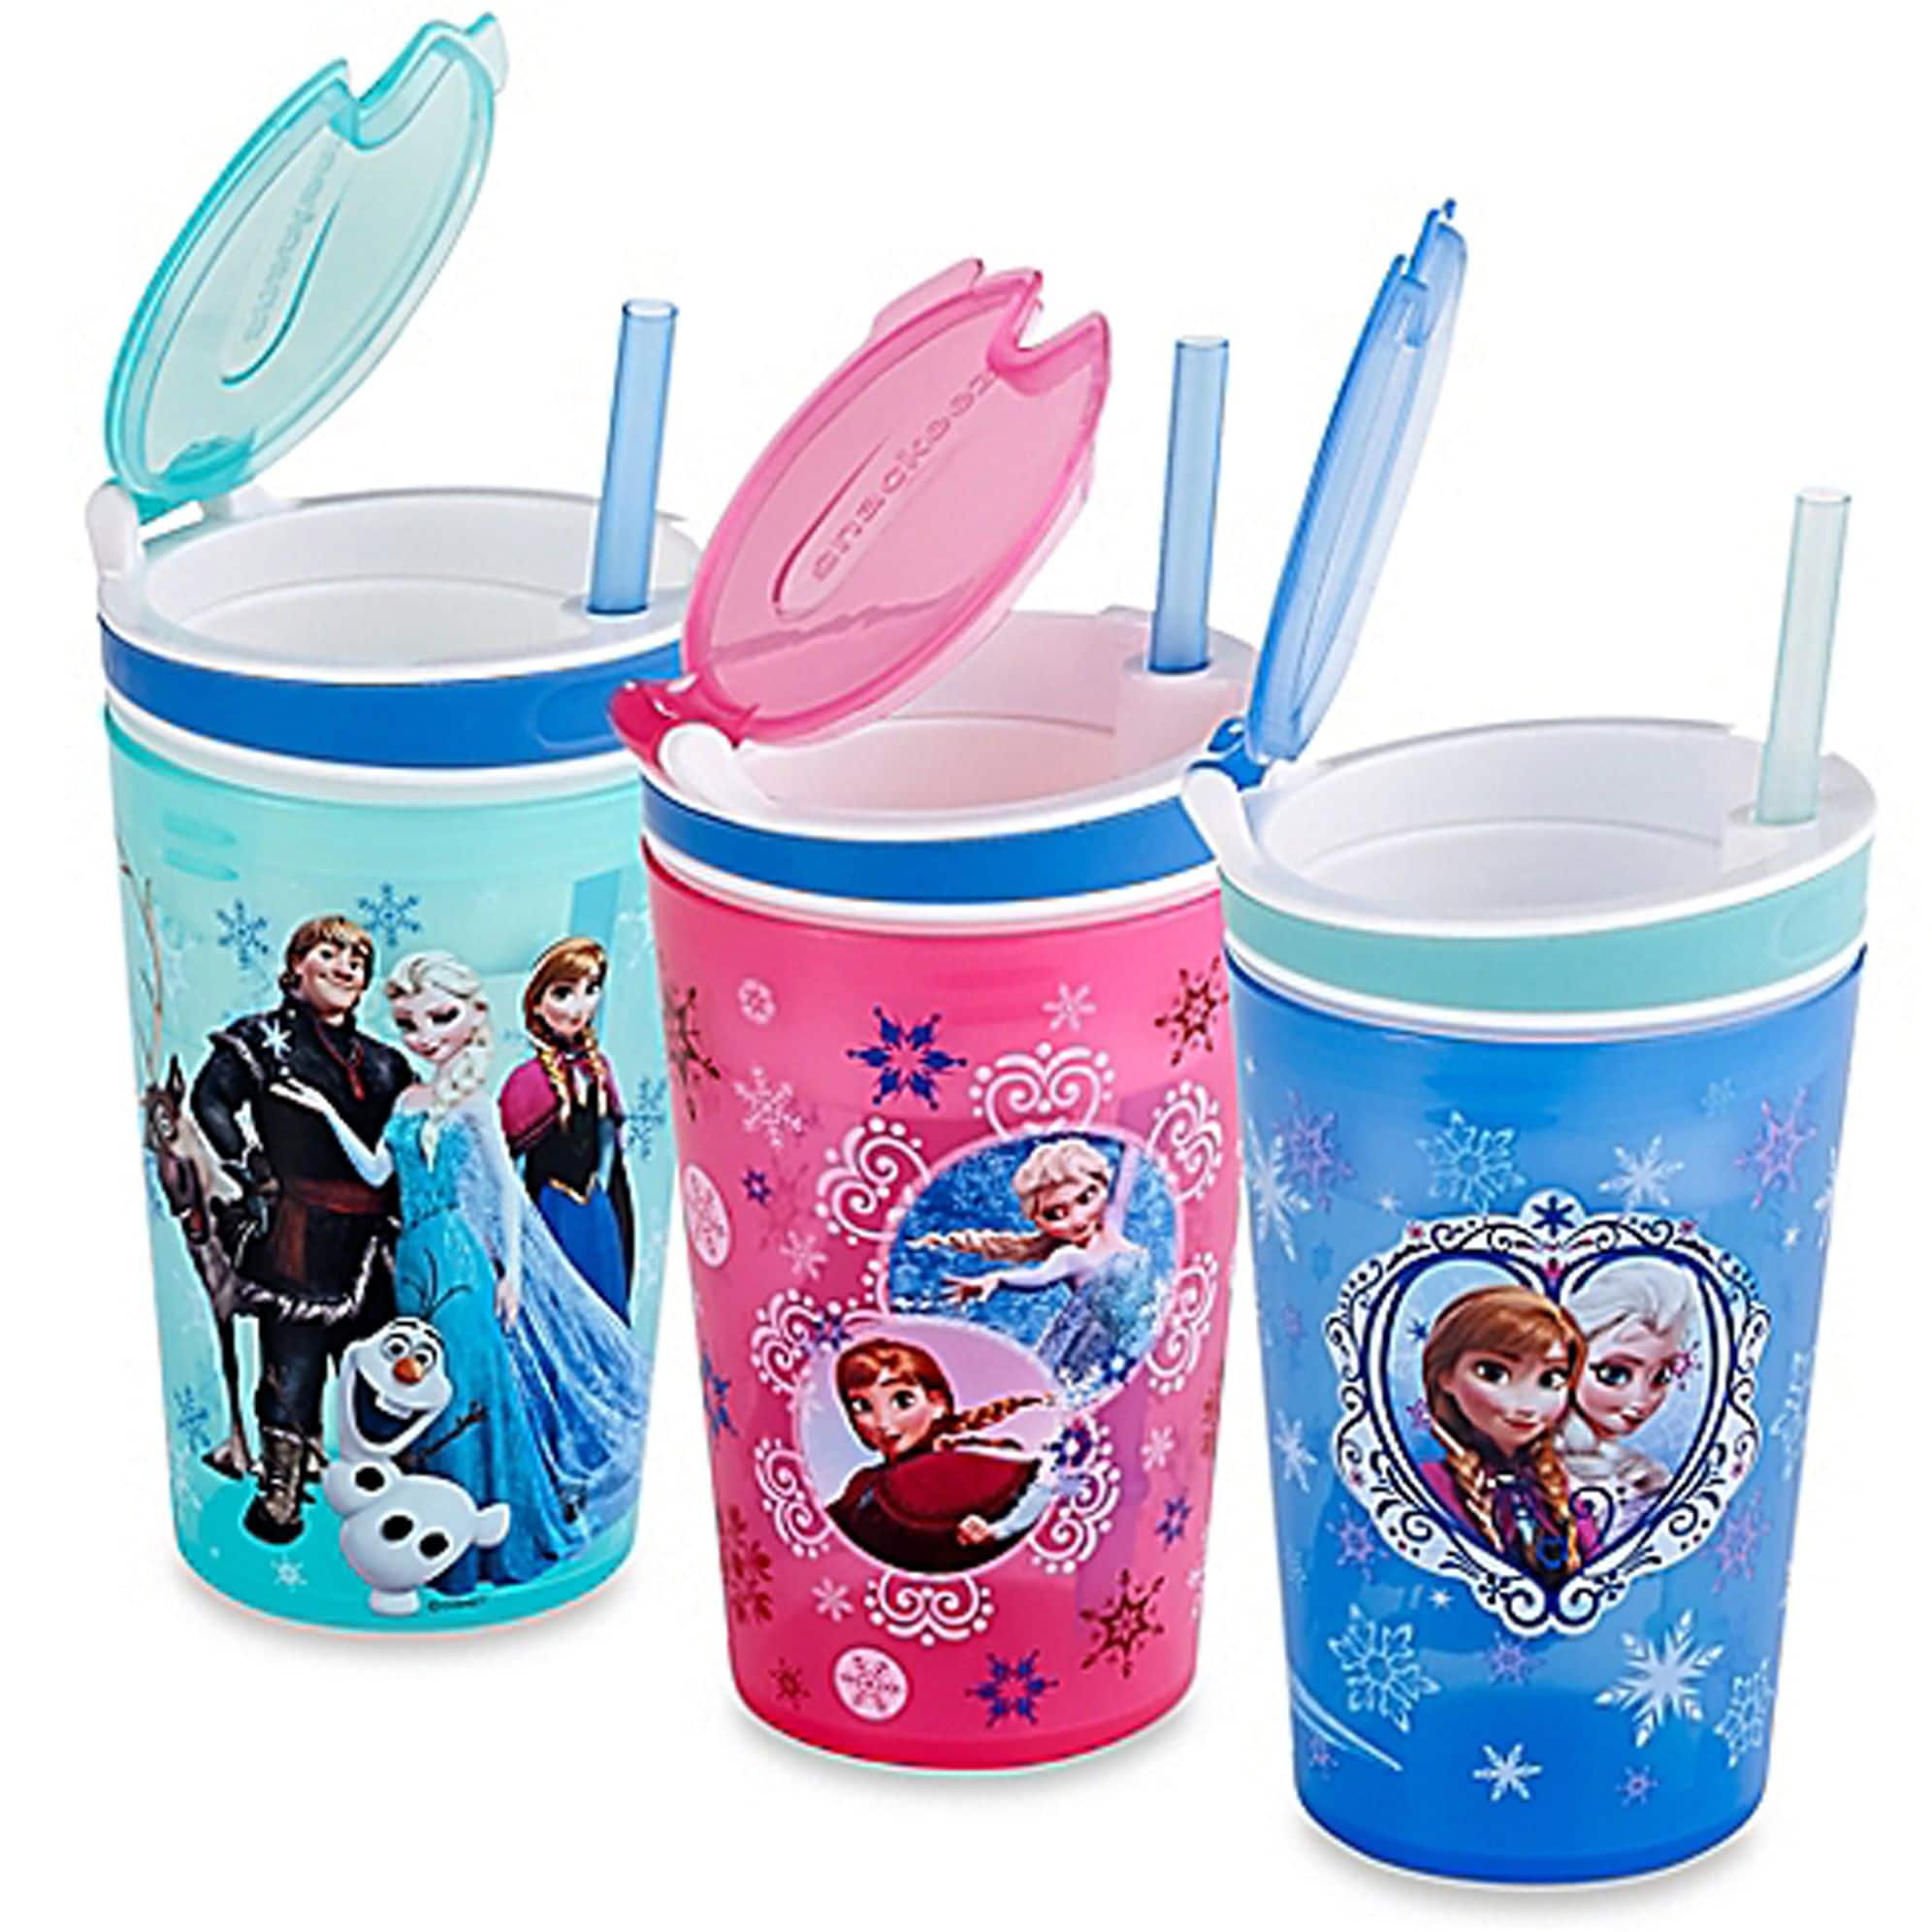 As Seen On TV, Dining, Snackeez 2 In Snack Drink Cup